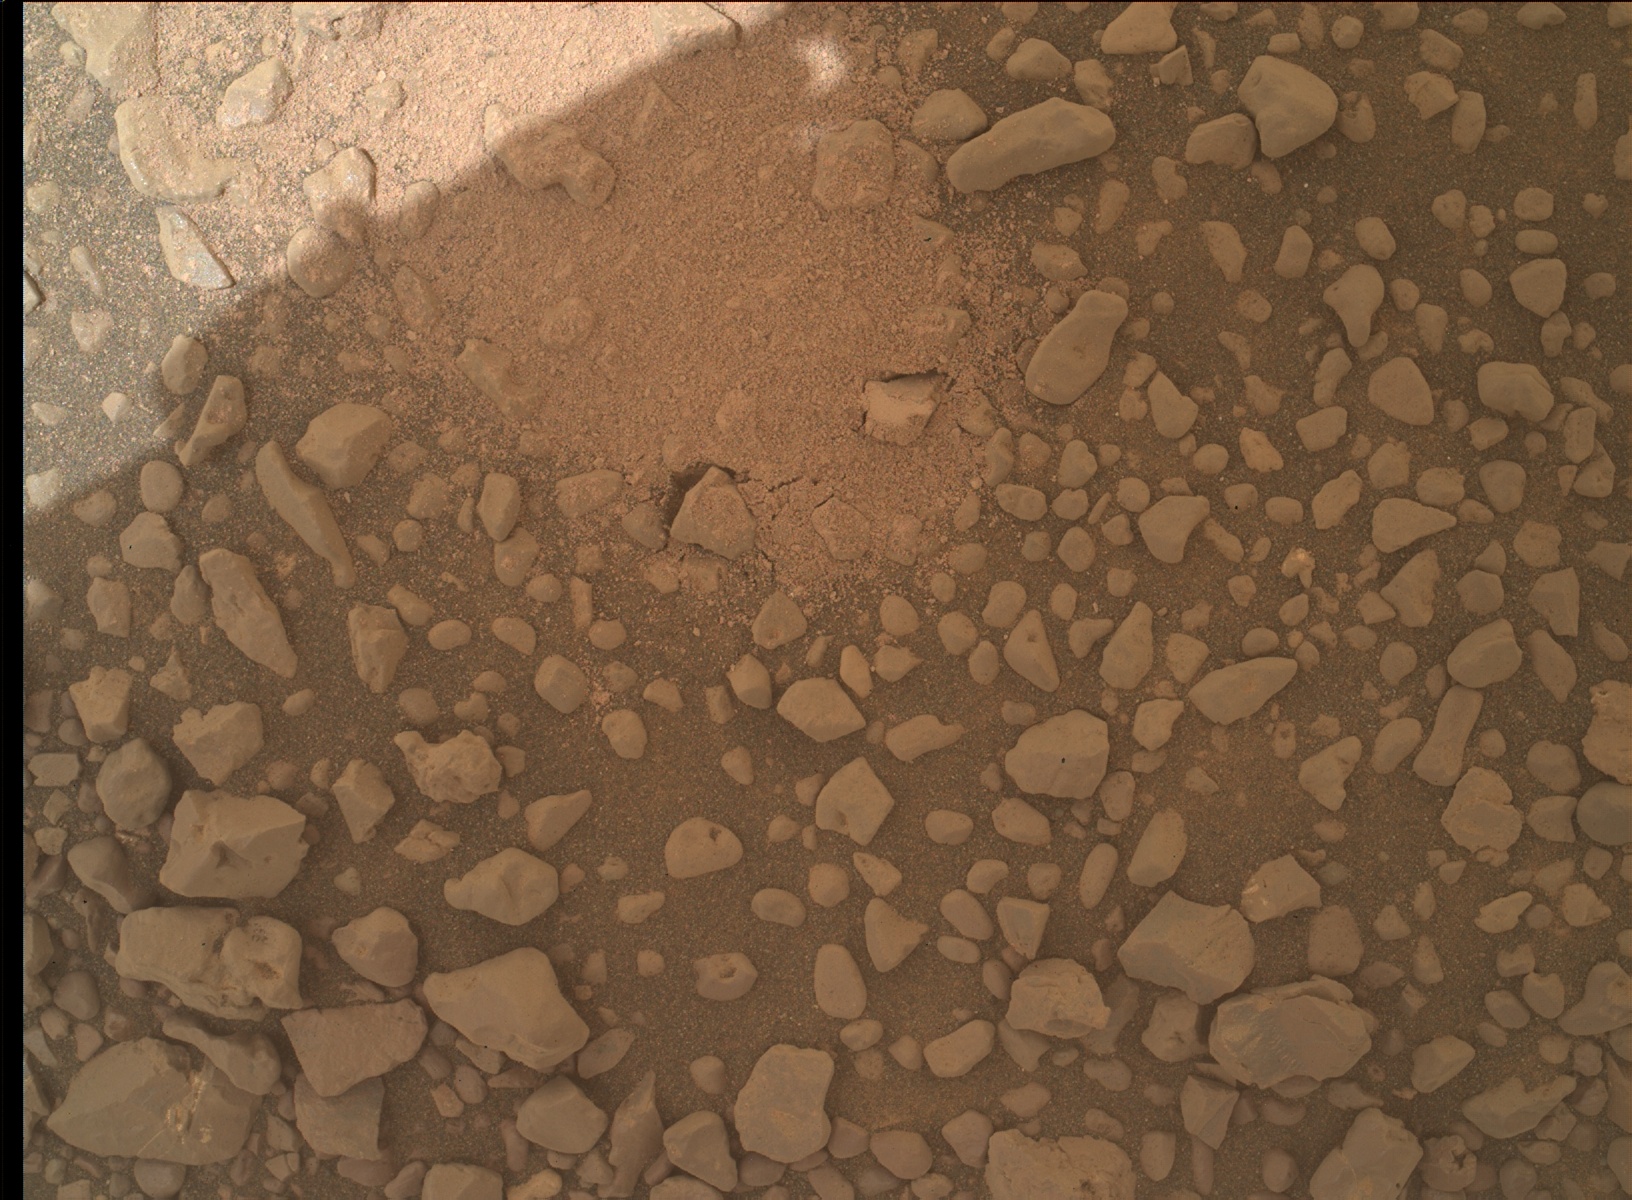 Nasa's Mars rover Curiosity acquired this image using its Mars Hand Lens Imager (MAHLI) on Sol 2289